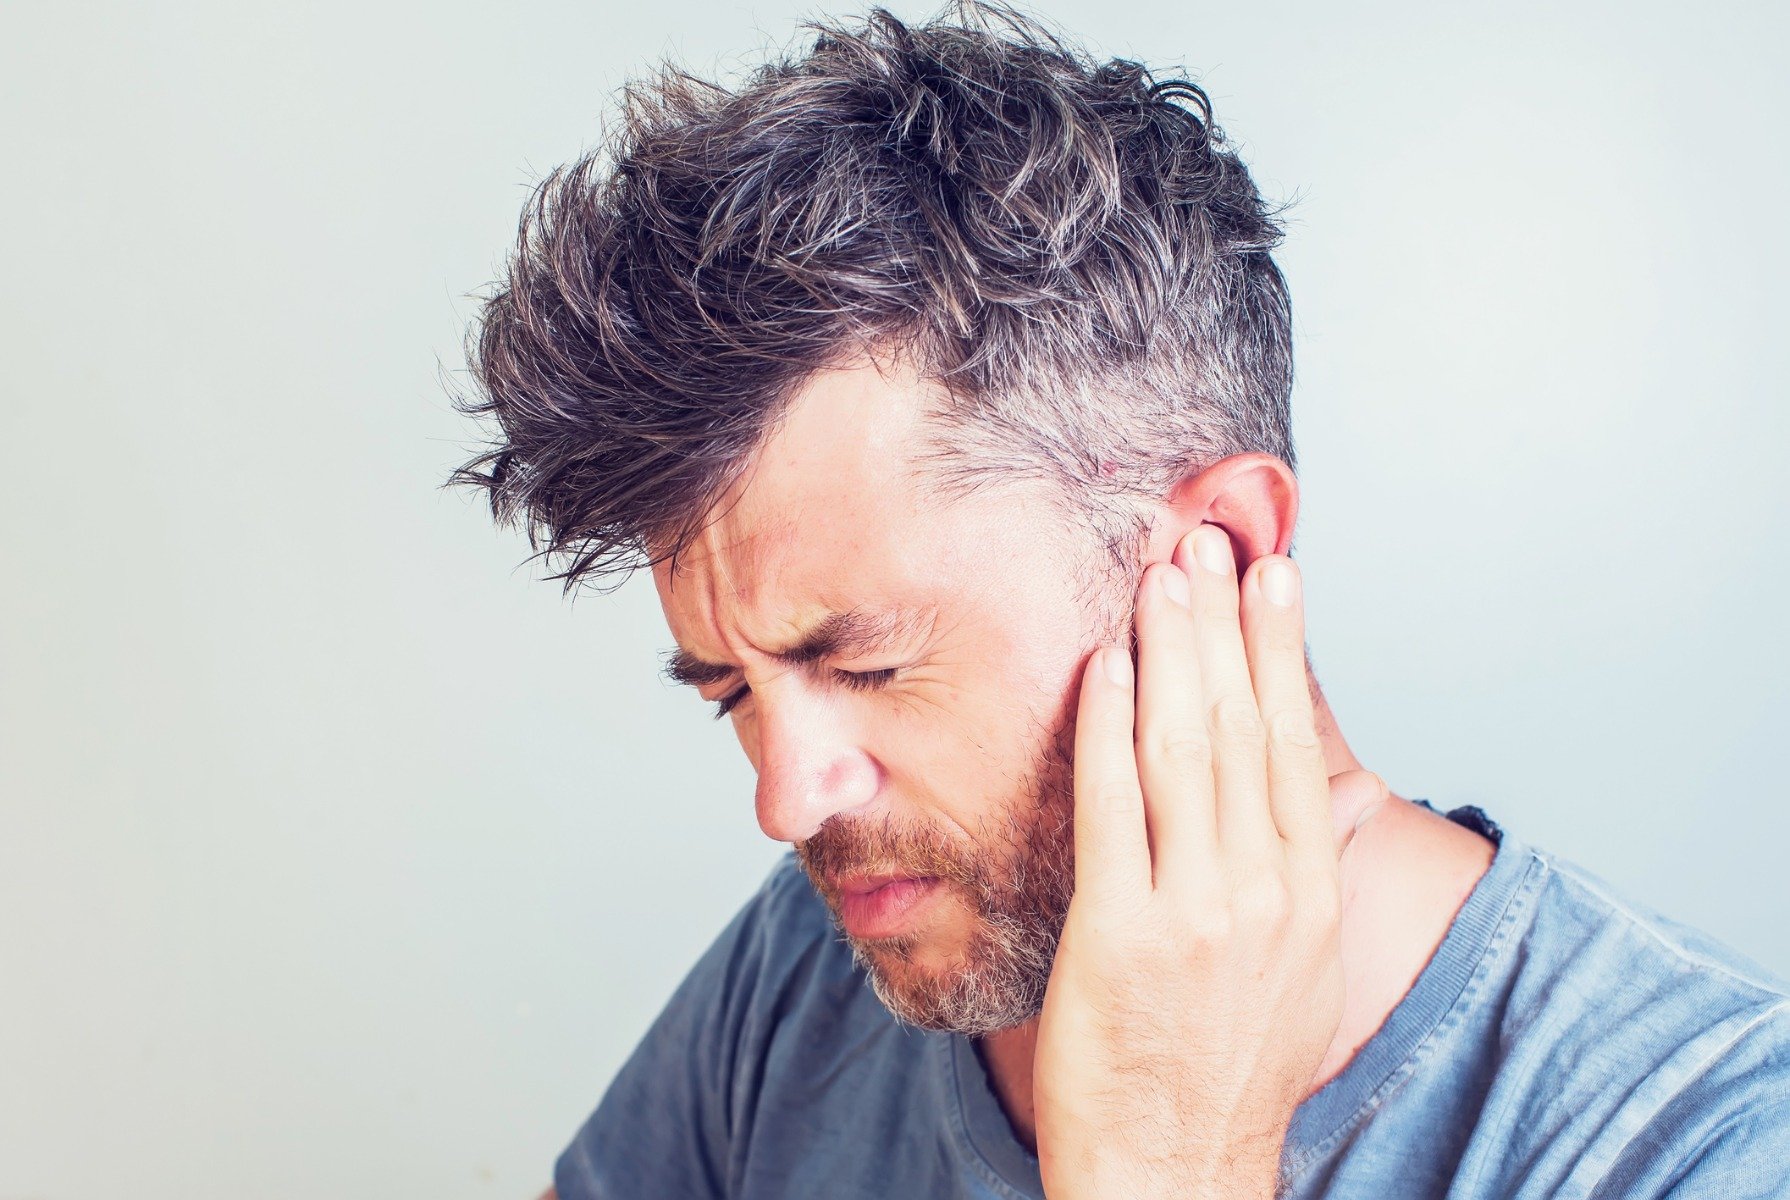 Ear pain, Illnesses in which you can practice